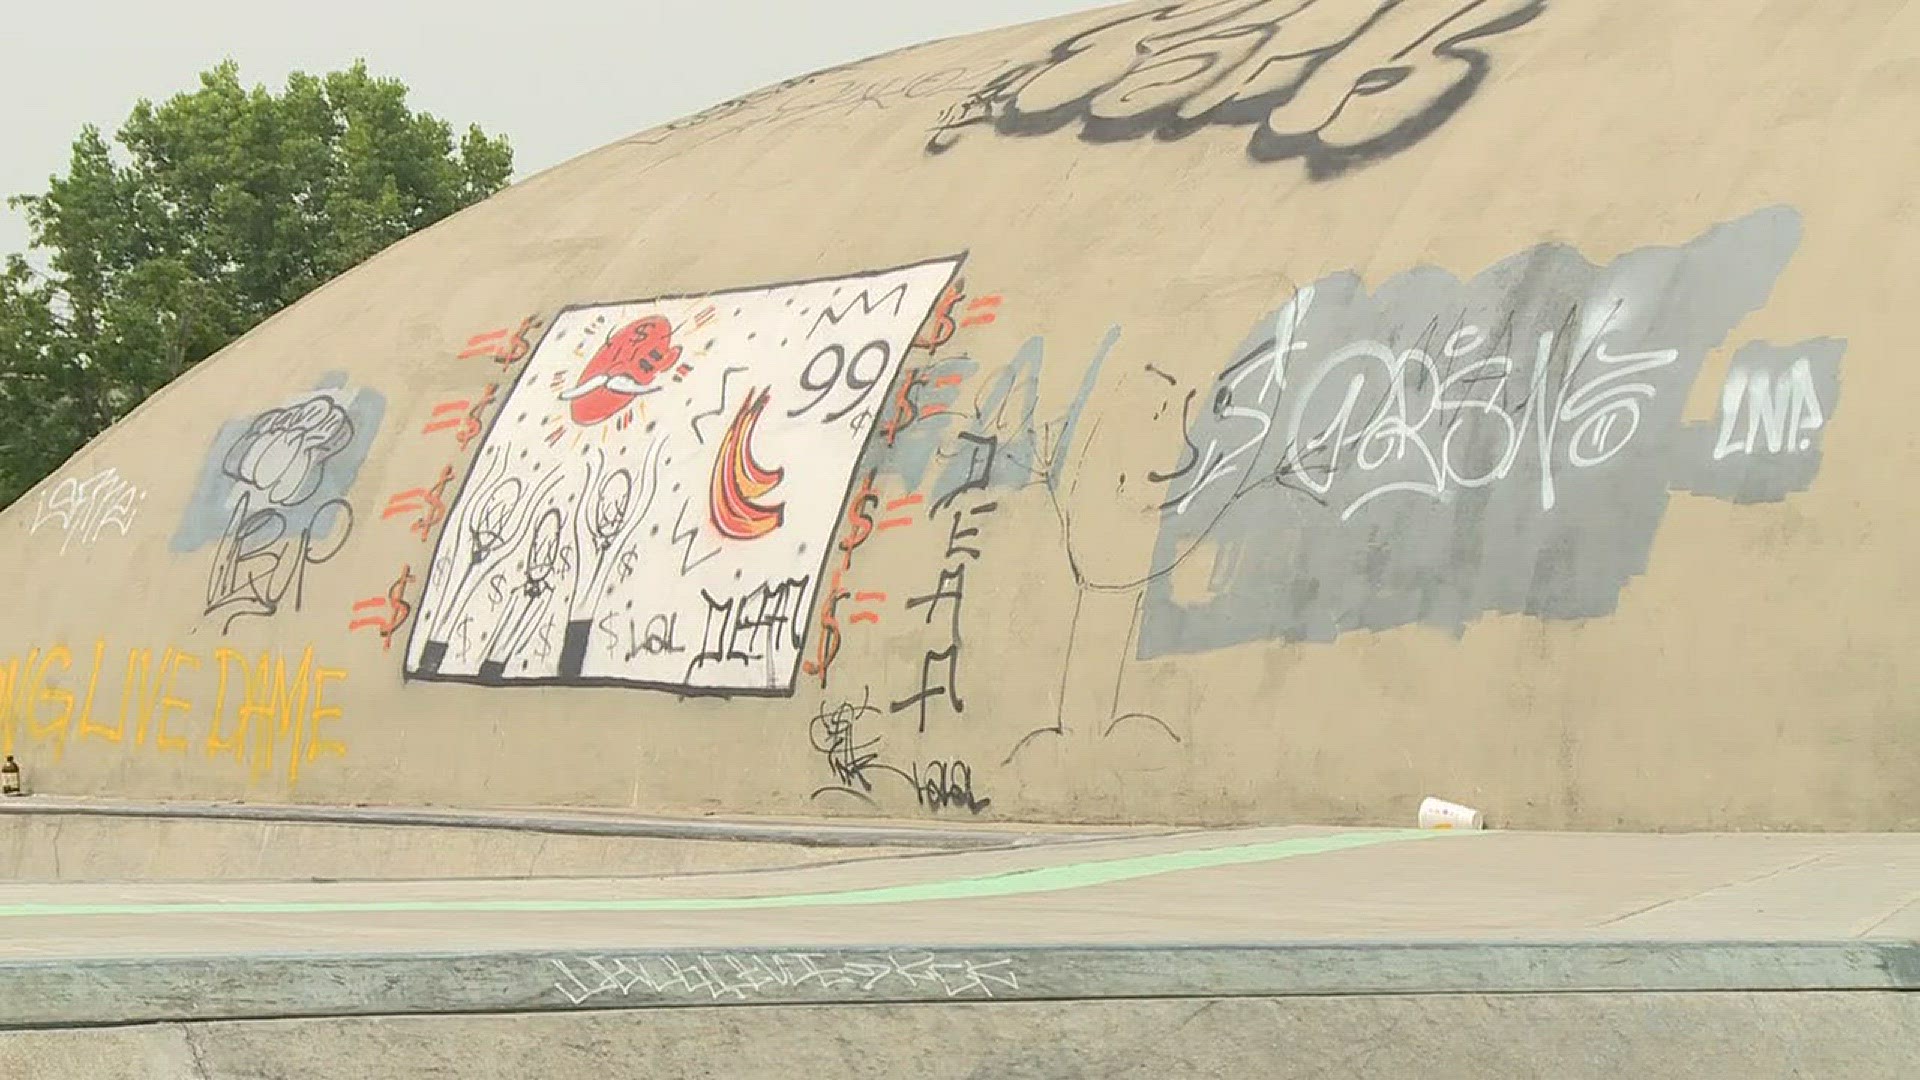 Graffiti becoming a problem at local sites